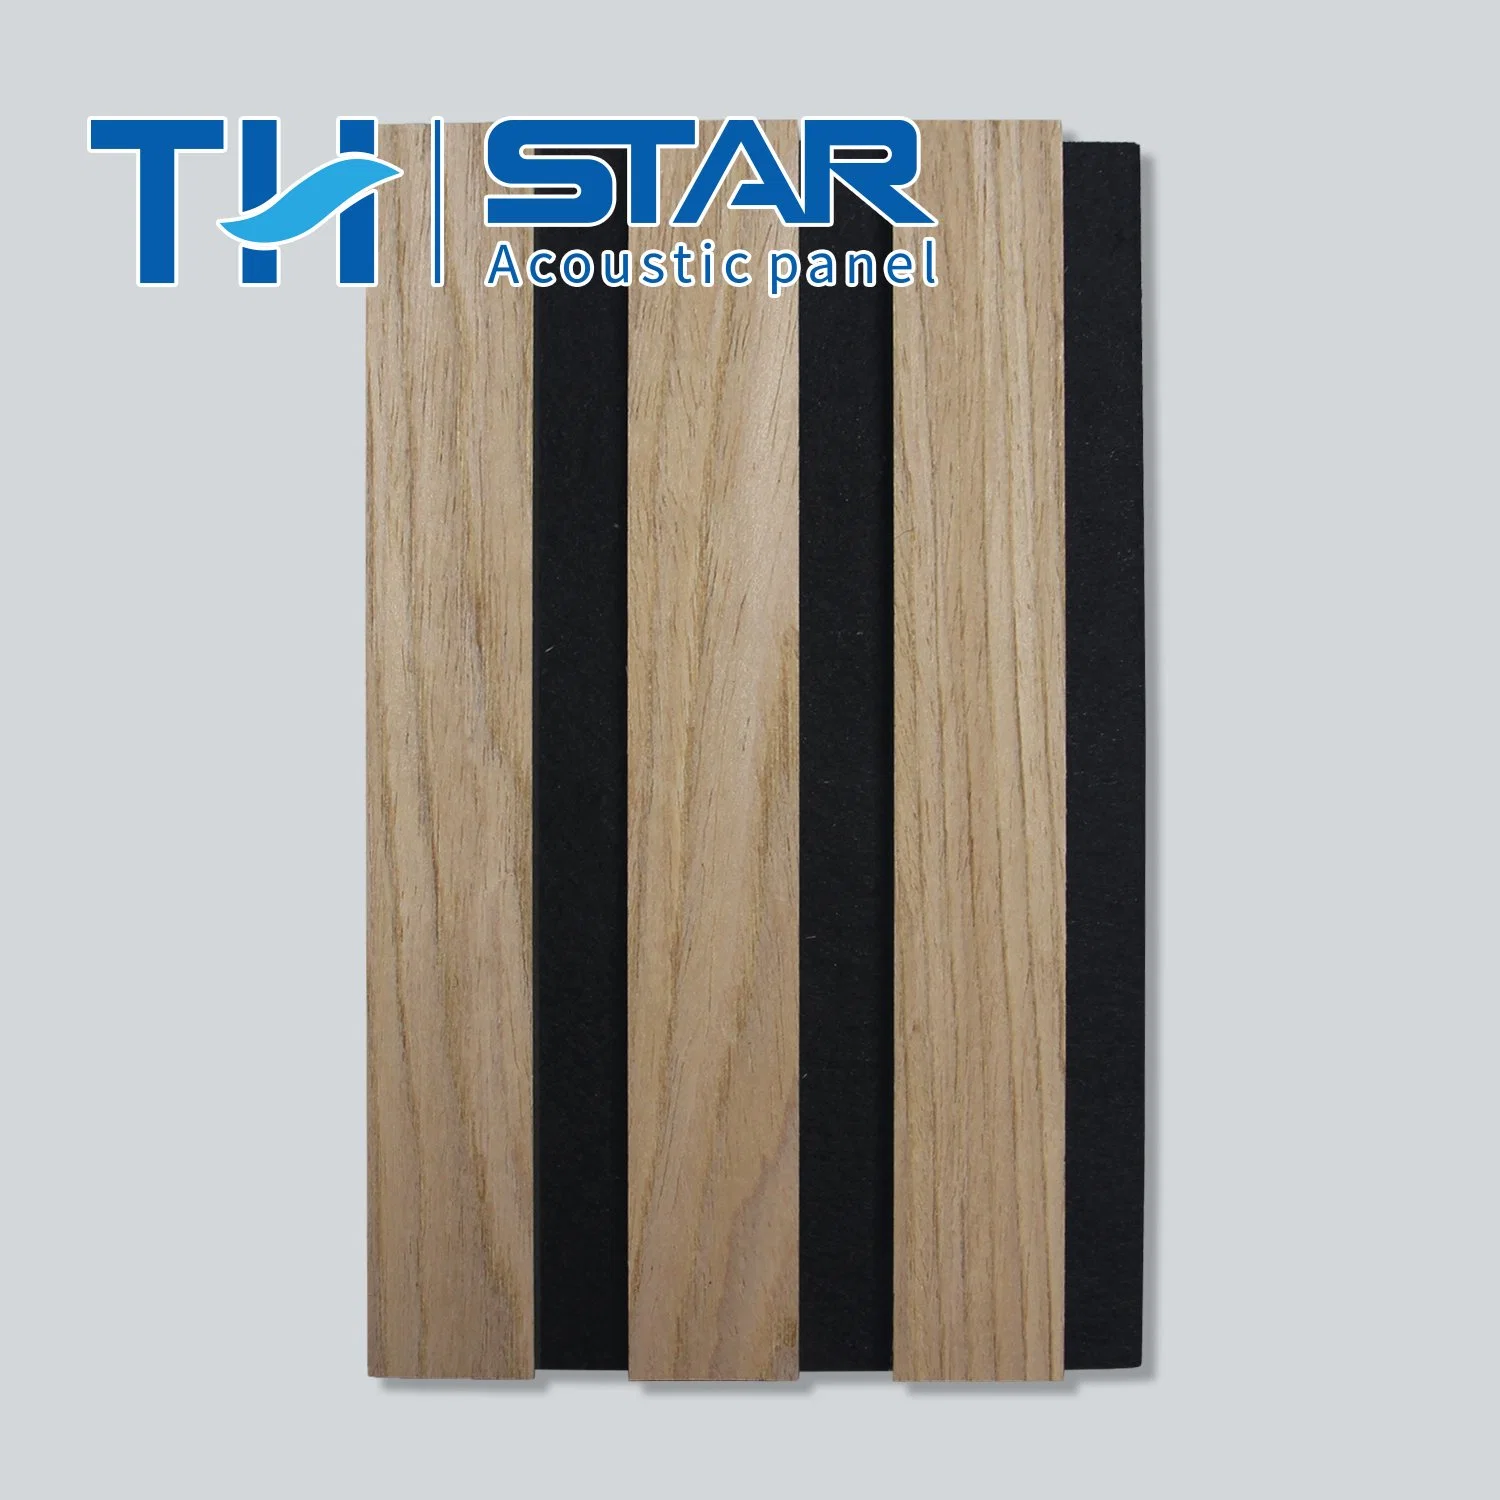 Europ Standards Ceiling Door Sound Absorbing Board Wooden Slatted Wall Acoustic Adsorption Panels